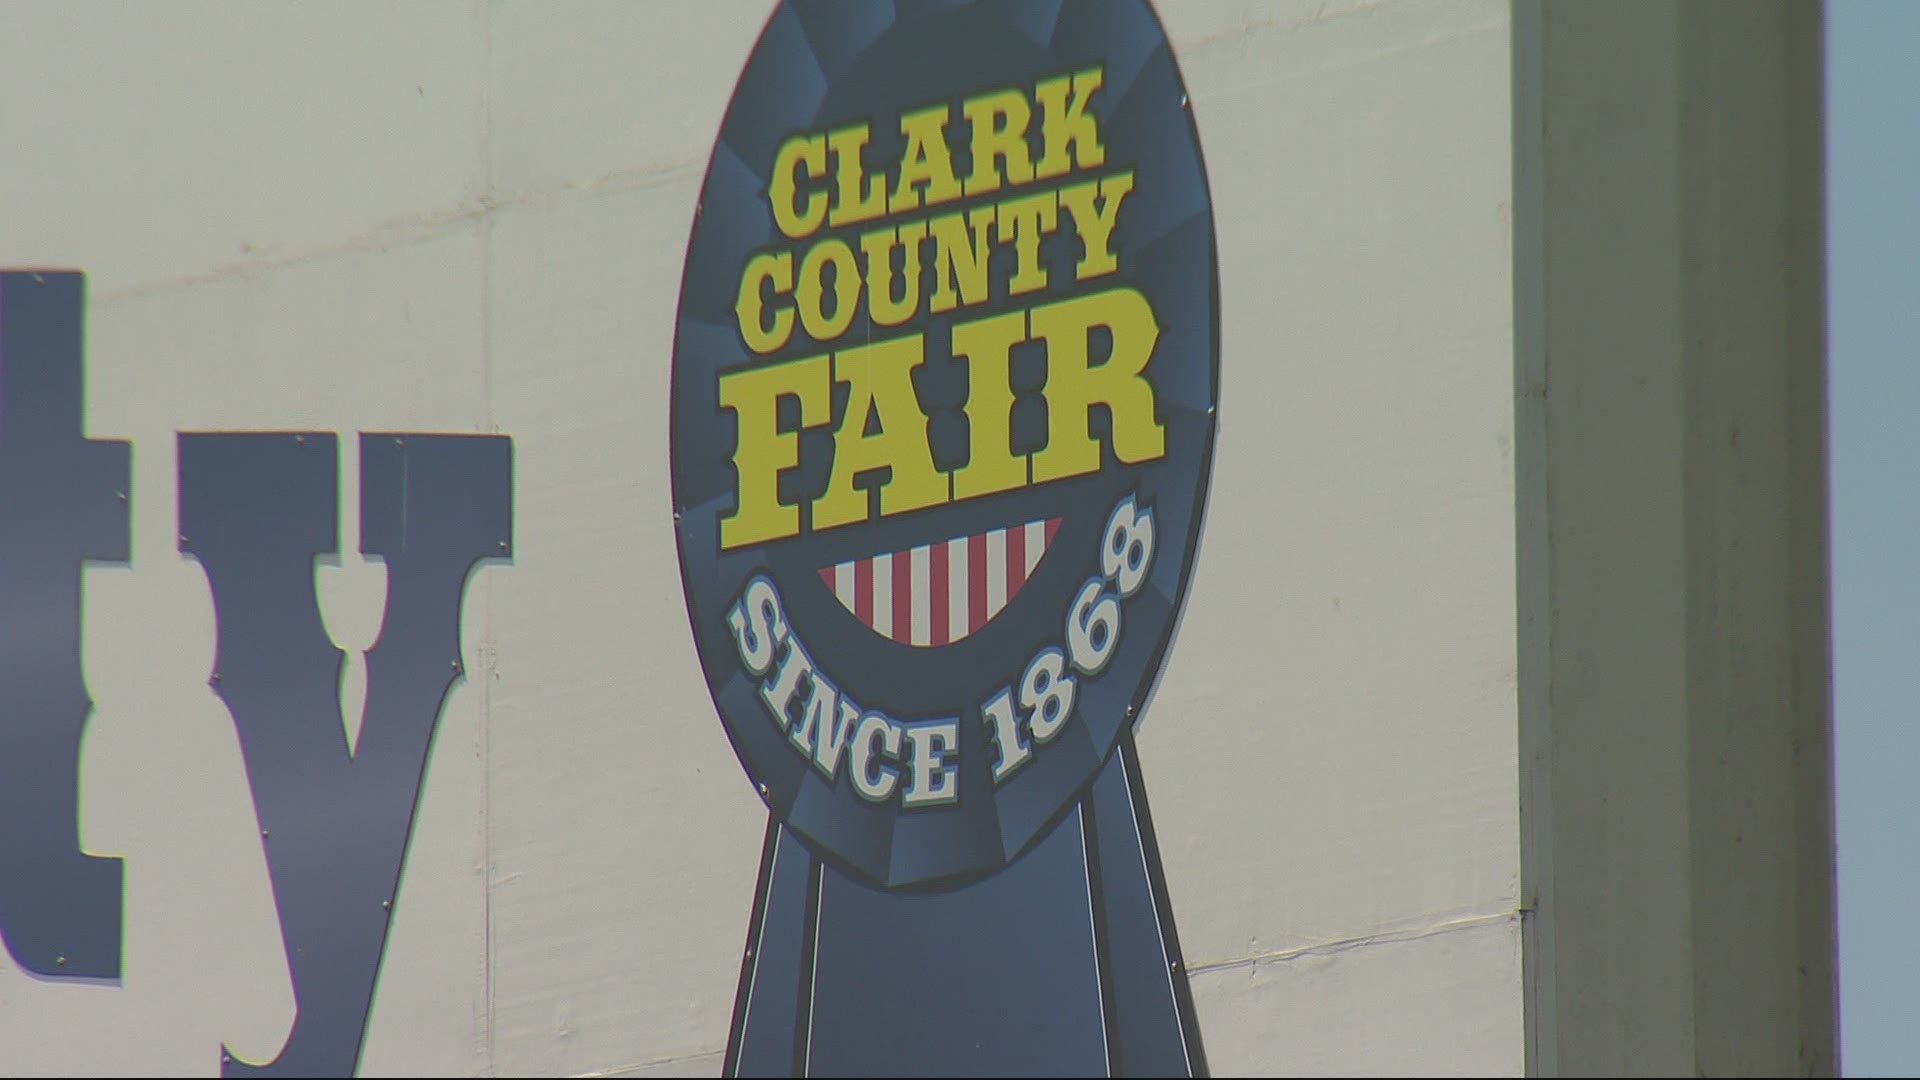 The Clark County Fair has been canceled for the second year in a row. Tim Gordon reports on what led to the decision.